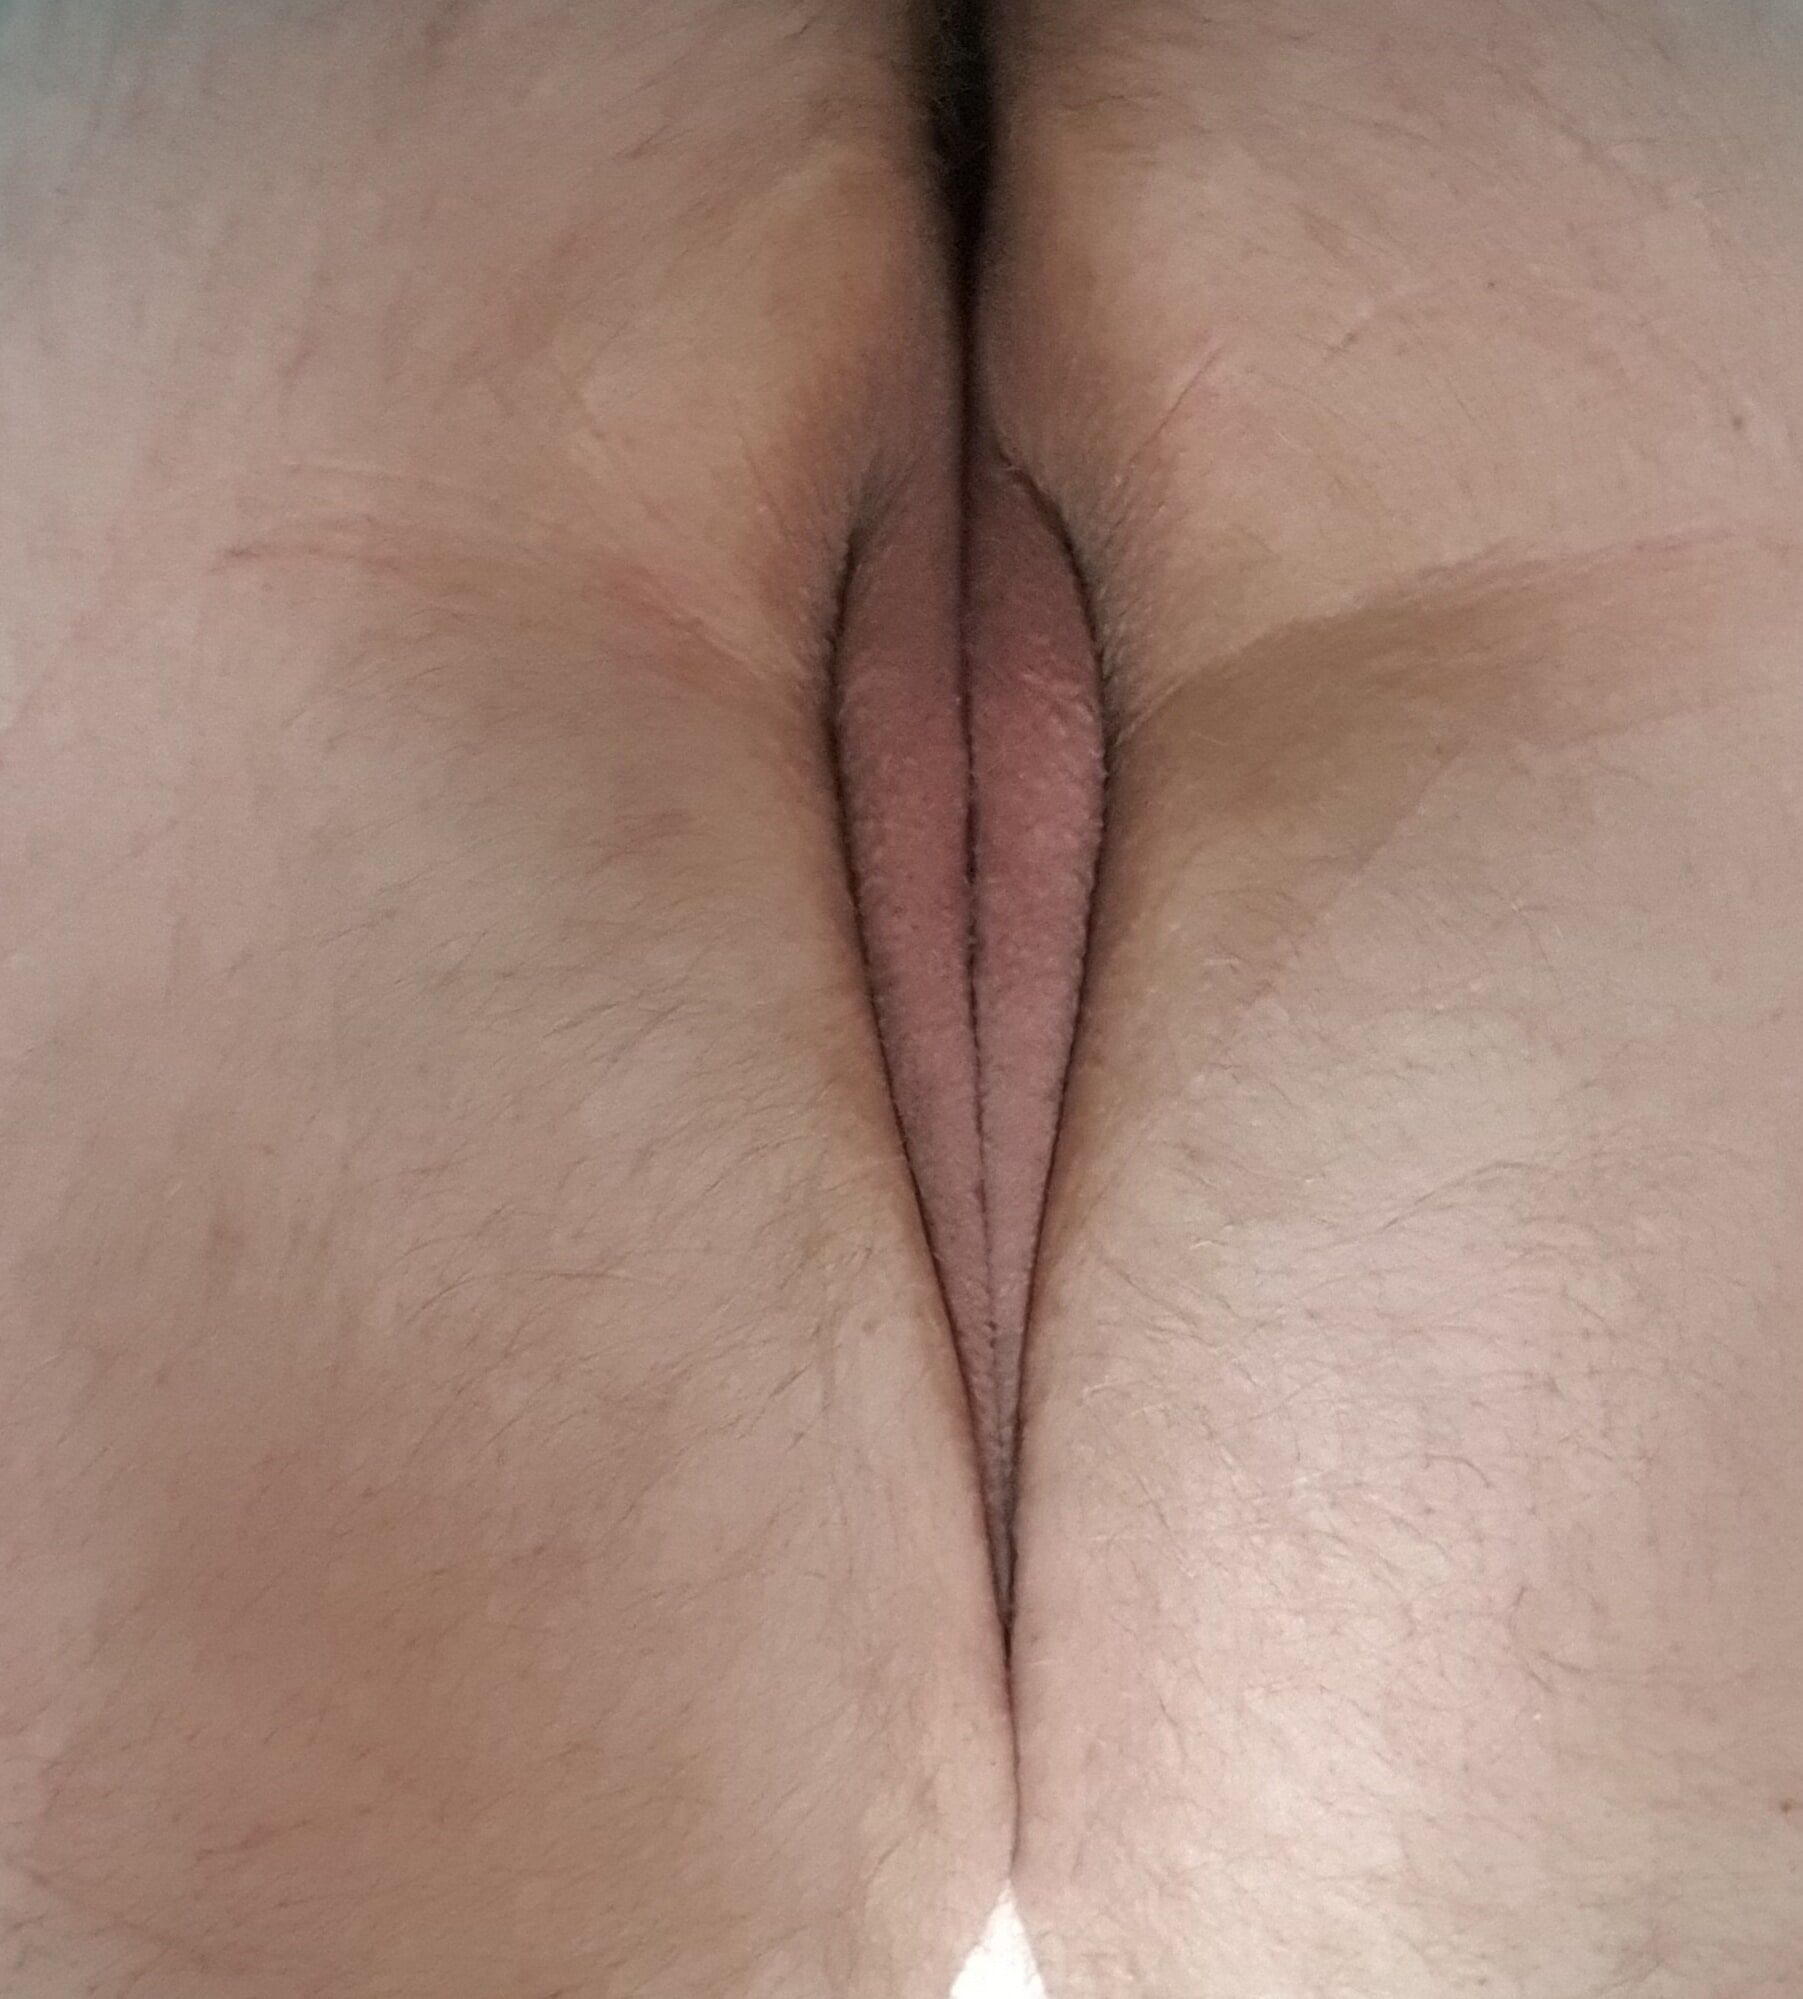 Presenting ftm pussy spread and cum filled 